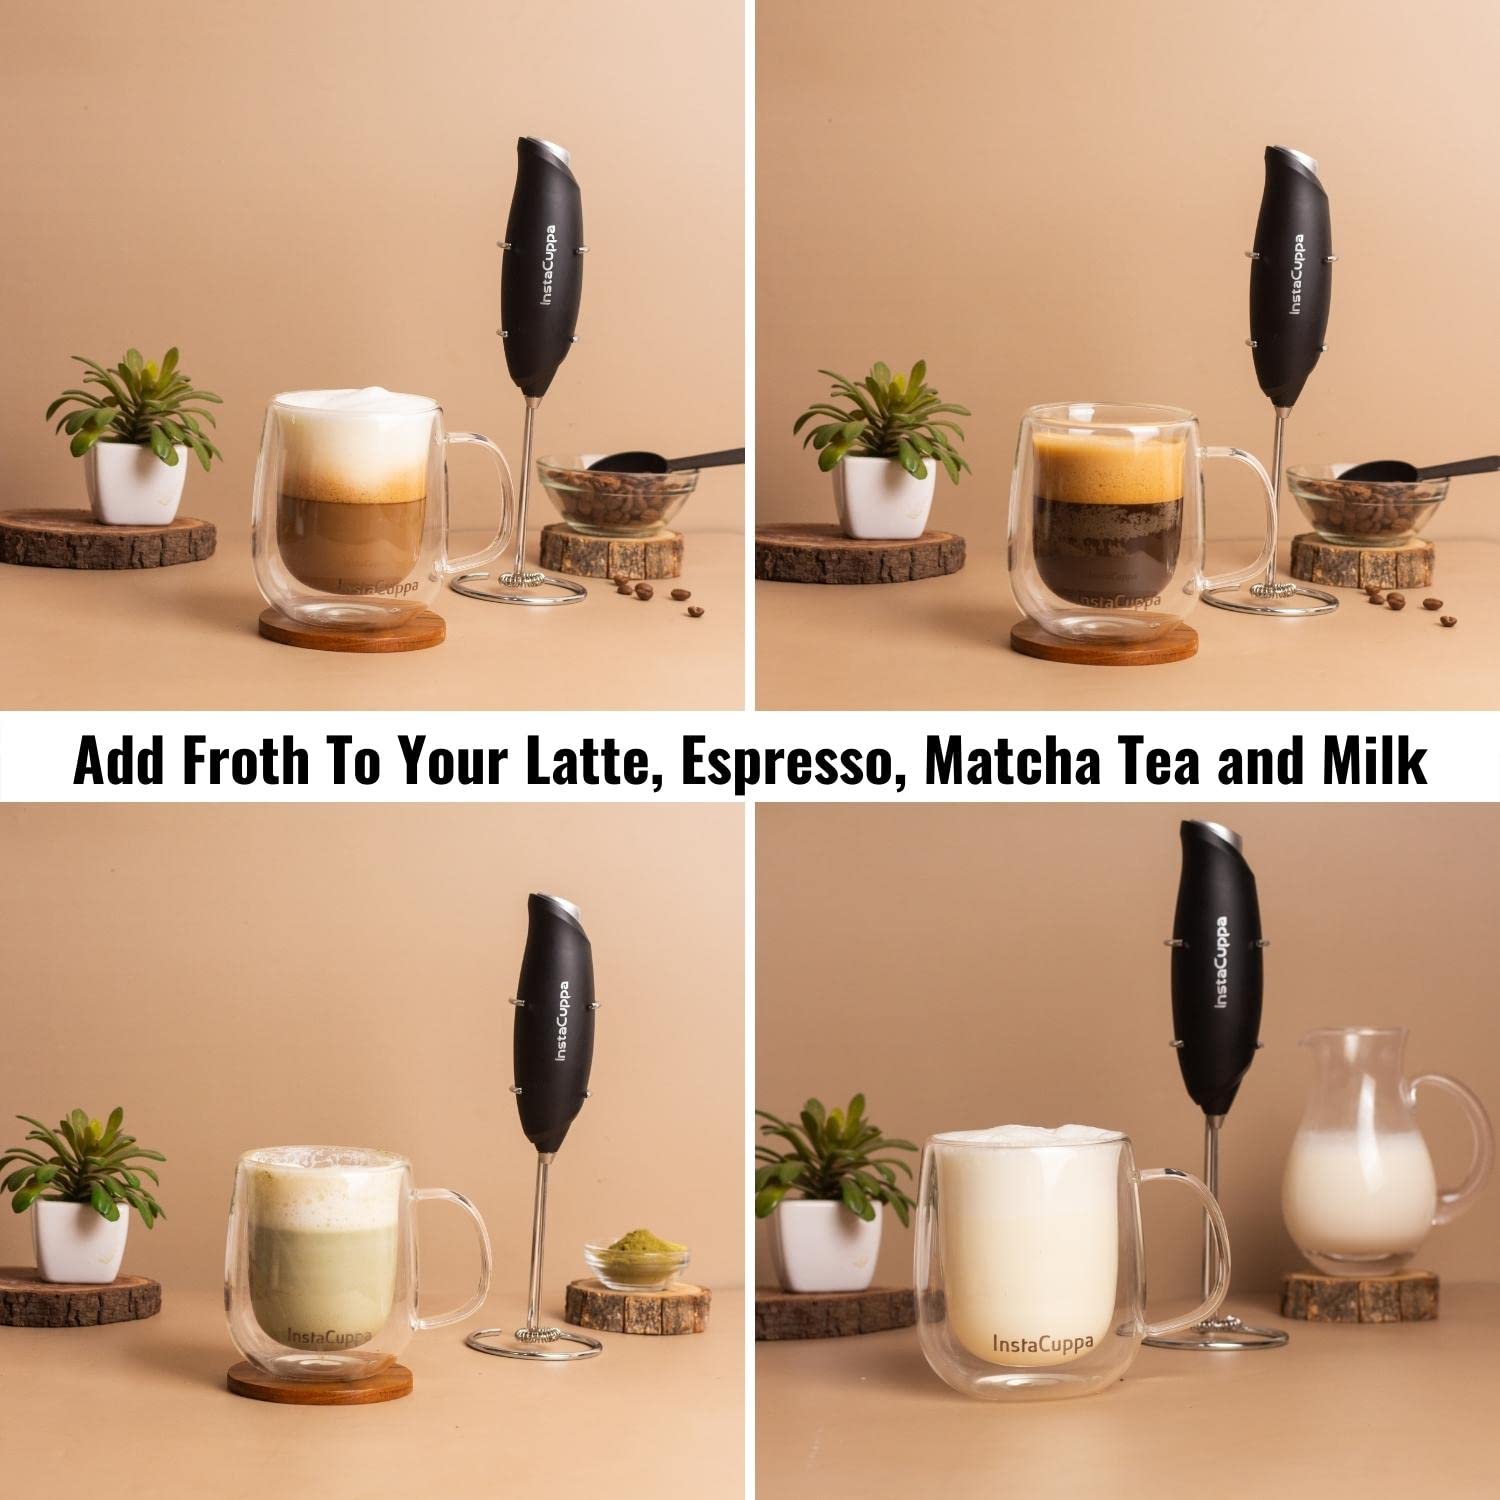 InstaCuppa Manual Milk Frother with Premium Grade Borosilicate